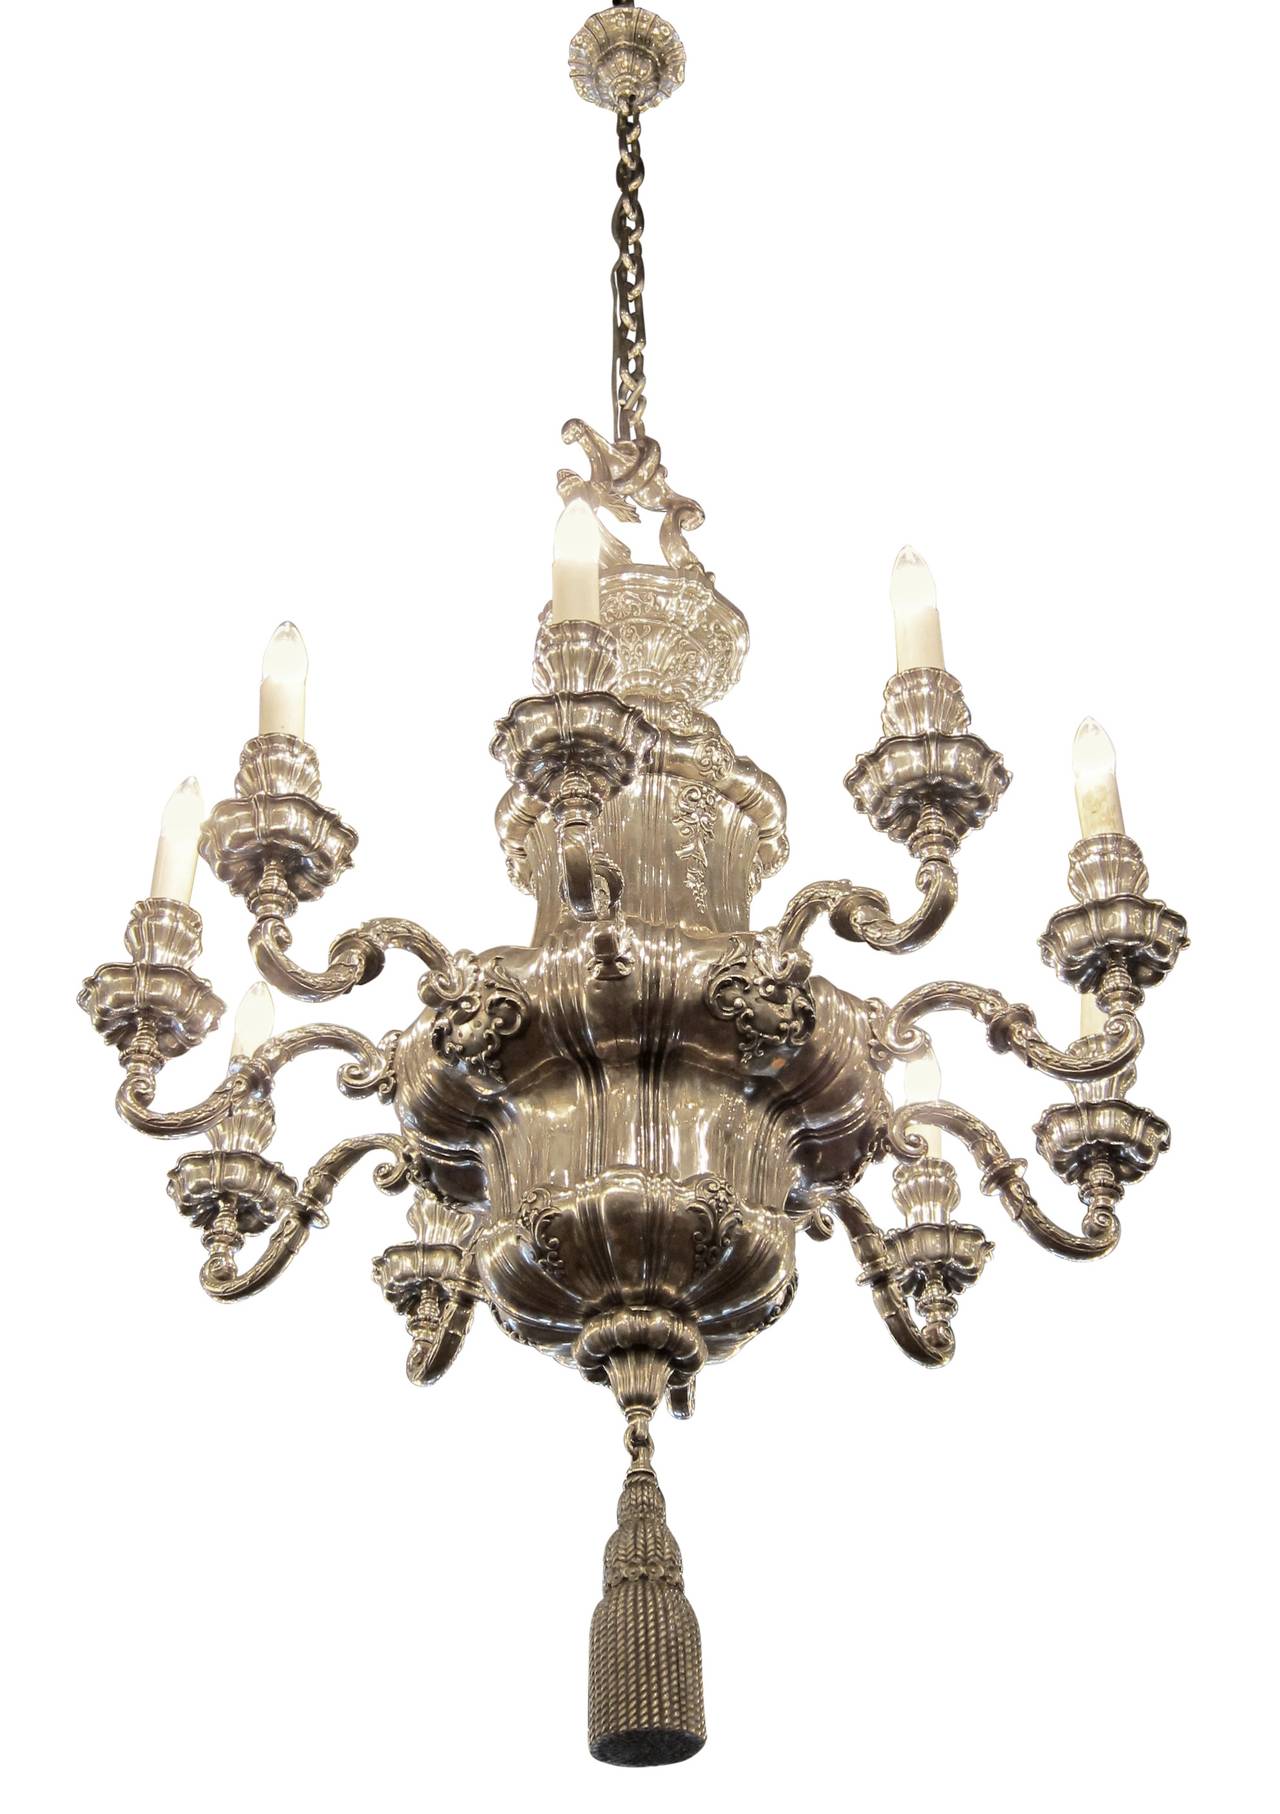 1895 silvered bronze Georgian style ten-arm chandelier by E. F. Caldwell with finely articulated tassel and well, with a massive loop in proportion to the frame. Cleaned and rewired. Please note, this item is located in one of our NYC locations.